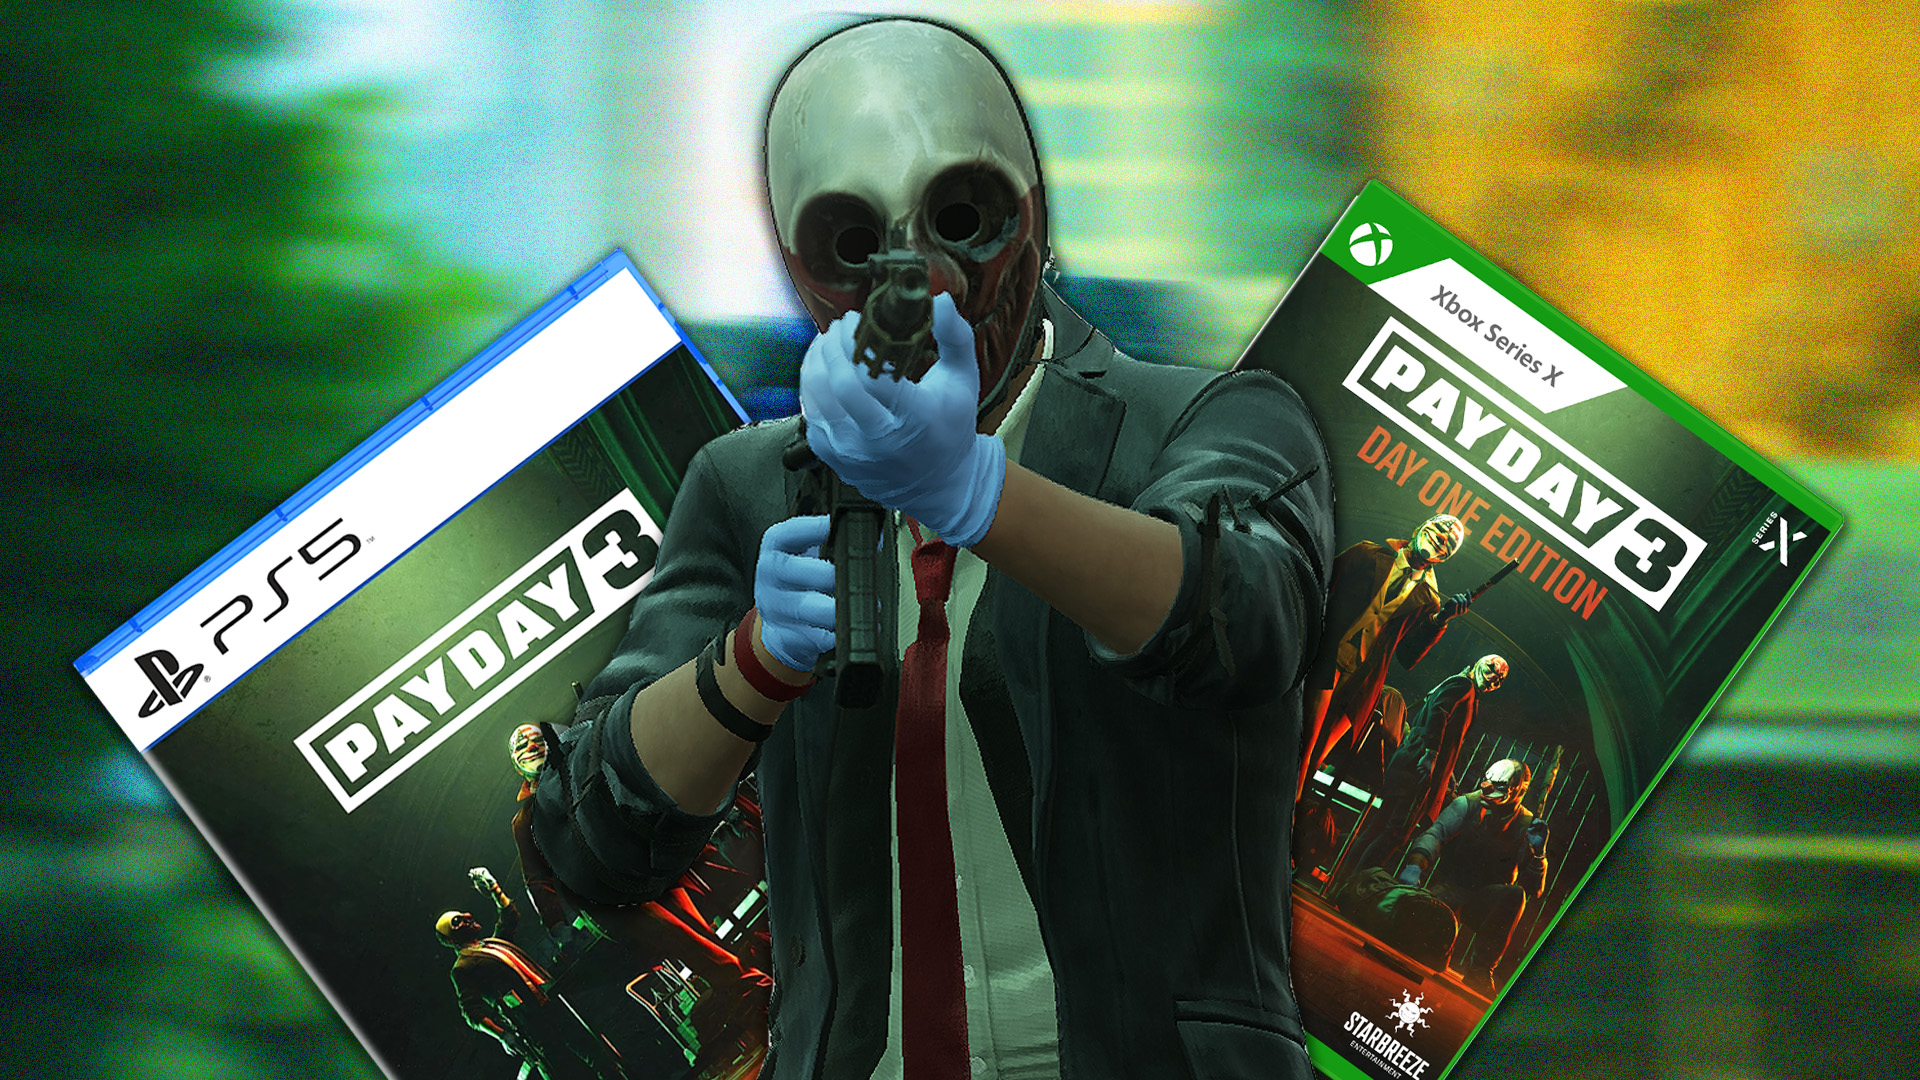 Mask or No Mask: The Tactical Evolution of Payday 3